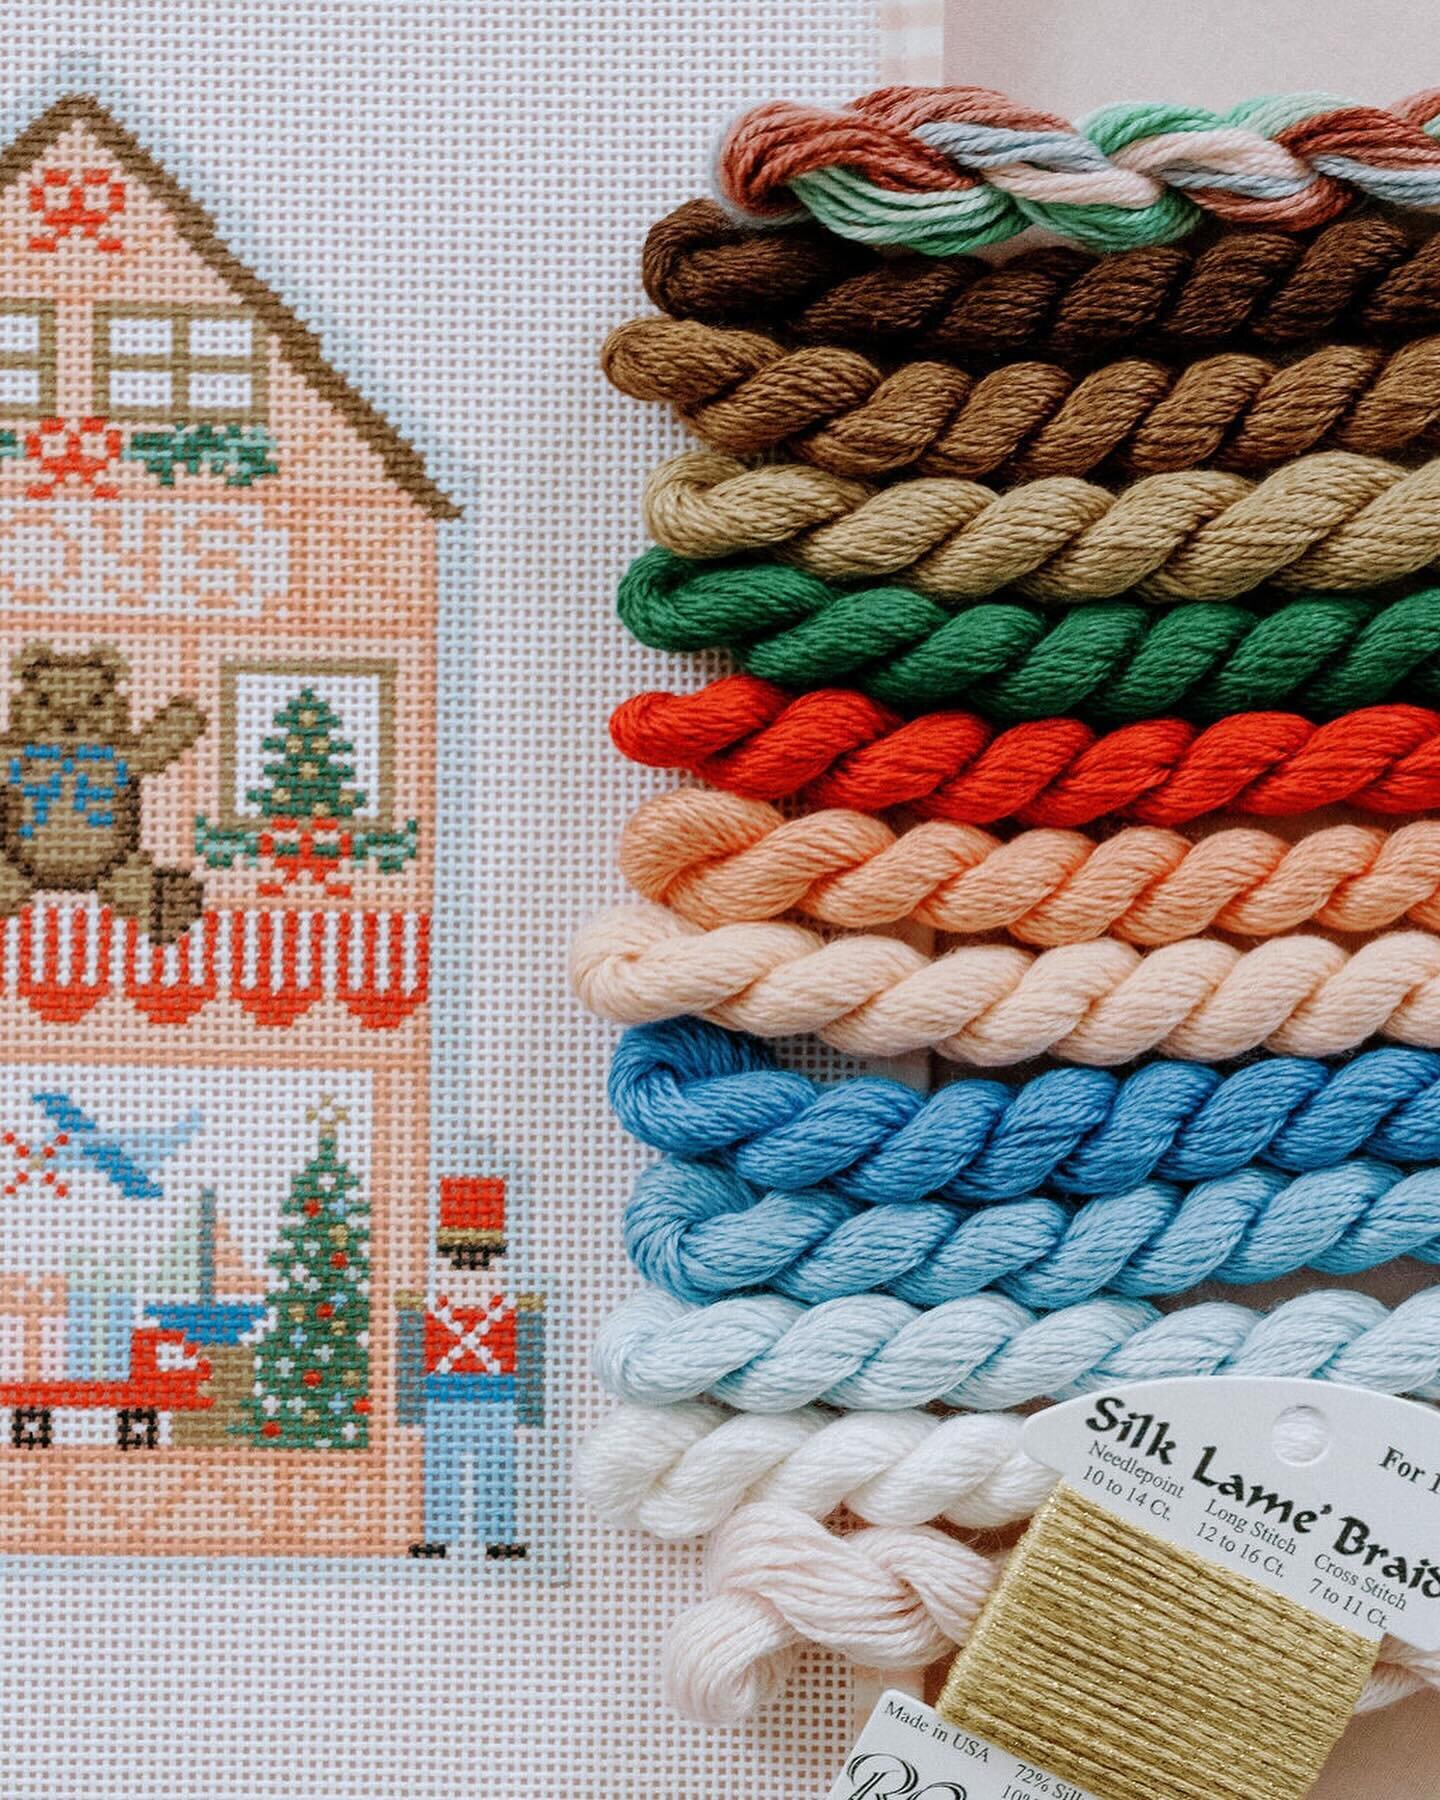 Exciting news! We now have kits with yarn available for all of our Christmas Village canvases! We have selected beautiful Silk and Ivory yarn and Silk Lame Braid metallics that are the perfect matches to the canvases. We hope this makes shopping easi